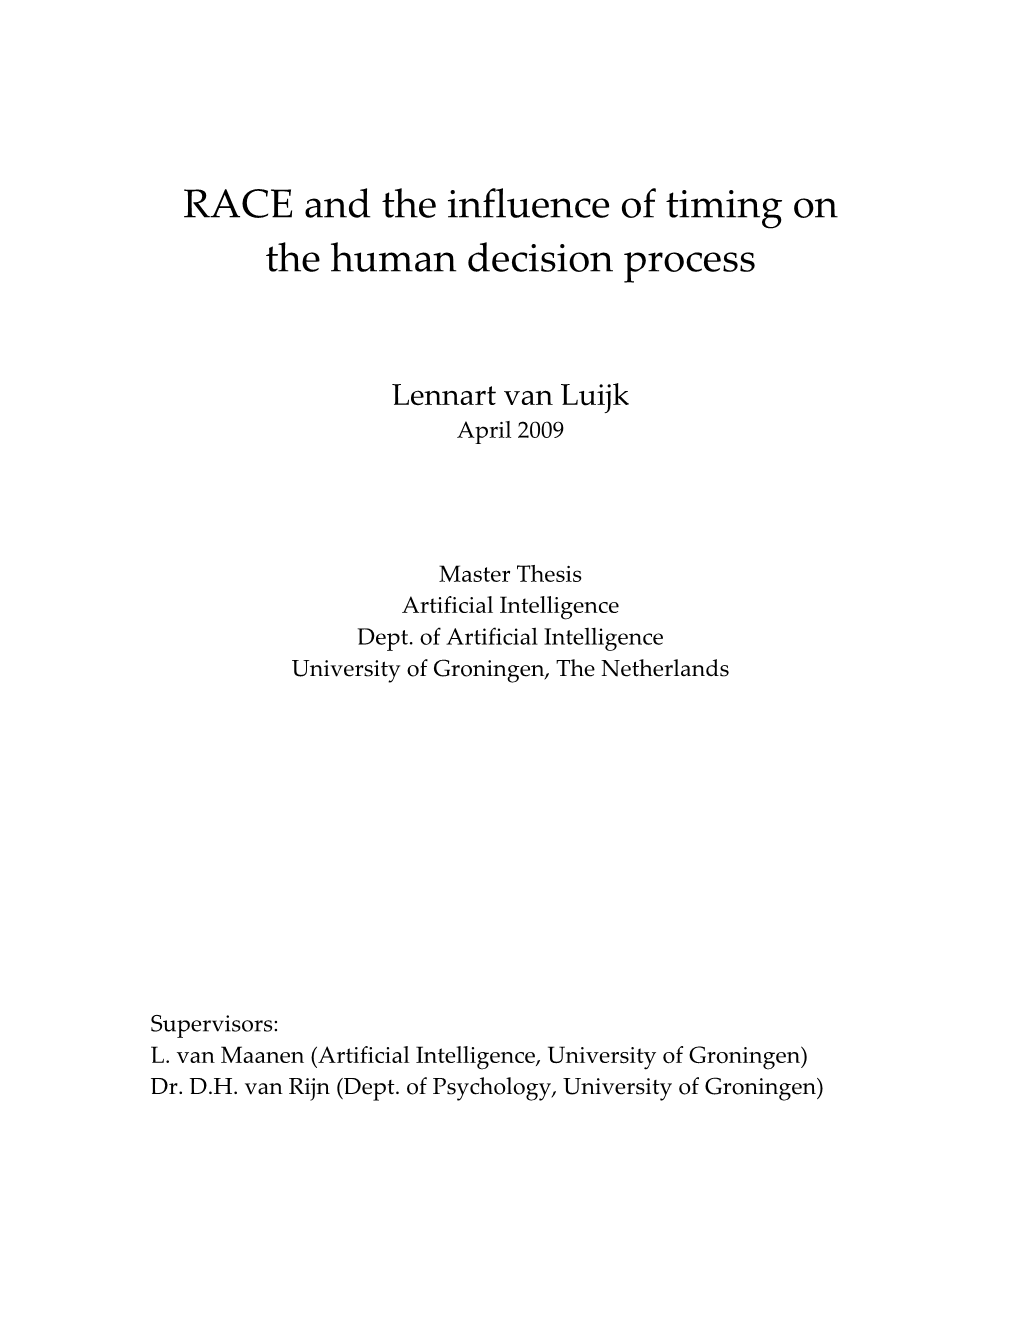 RACE and the Influence of Timing on the Human Decision Process